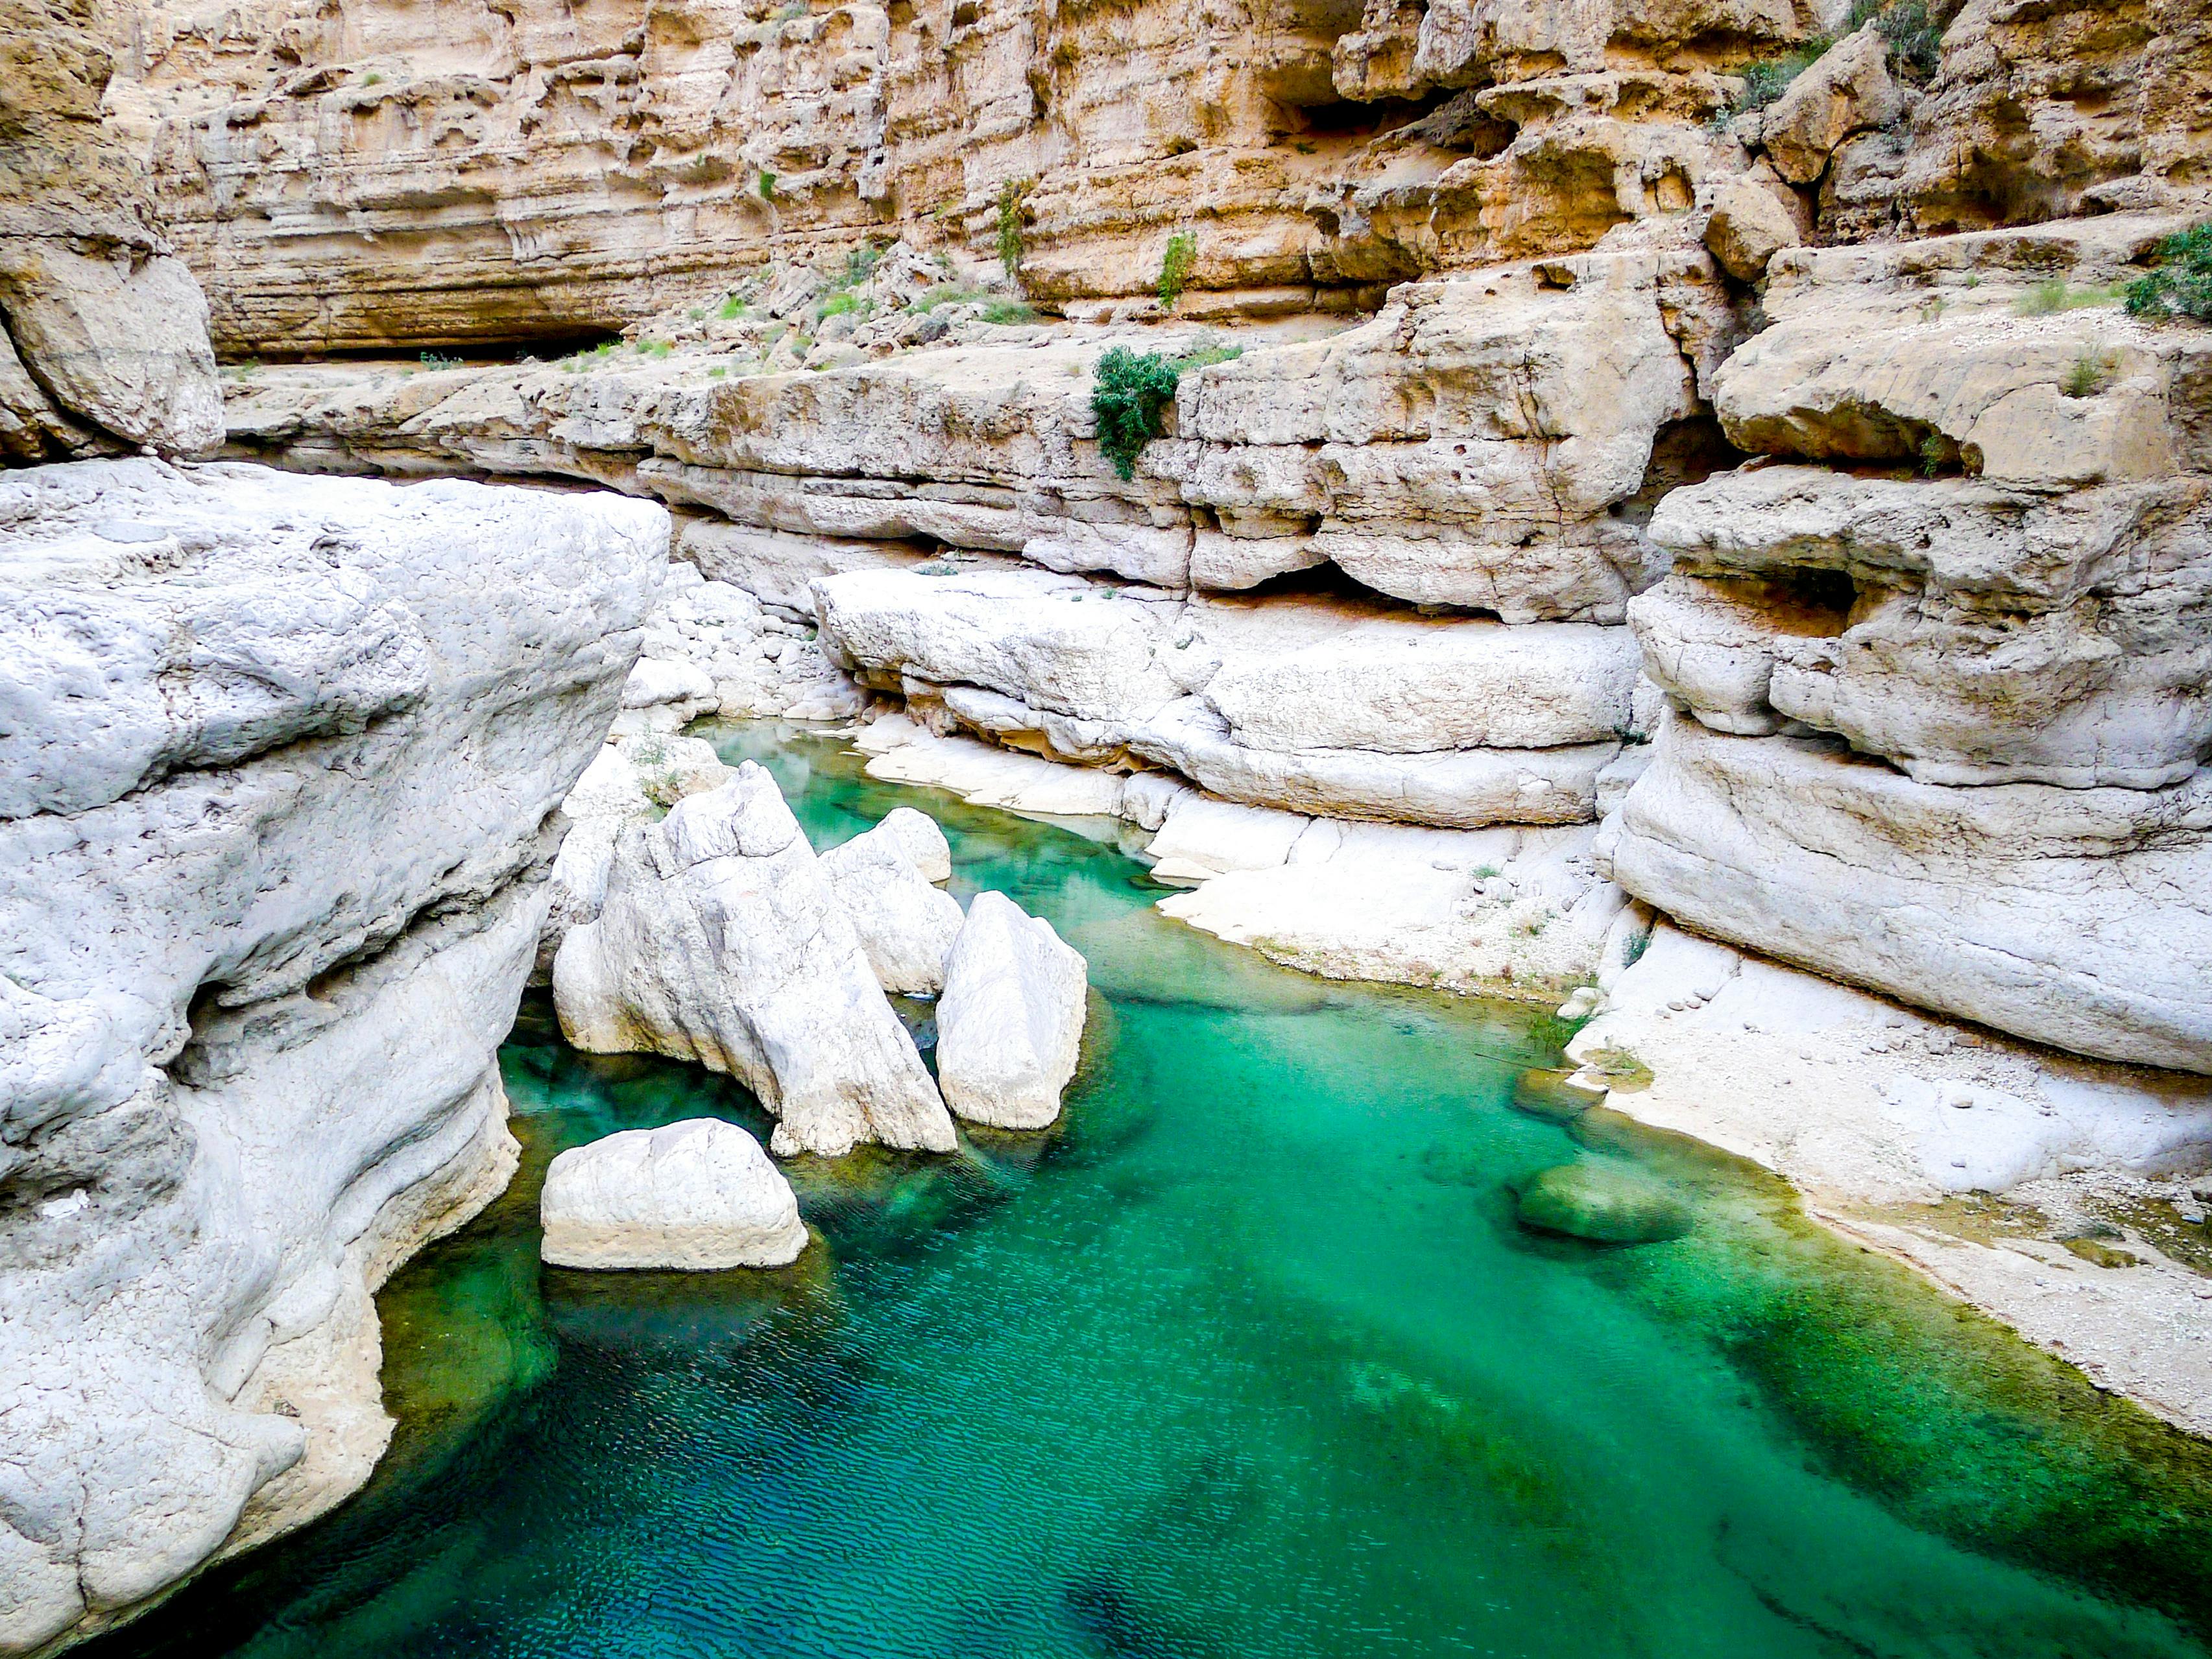 Private tour of Bimah Sinkhole and Wadi Shab on 4x4